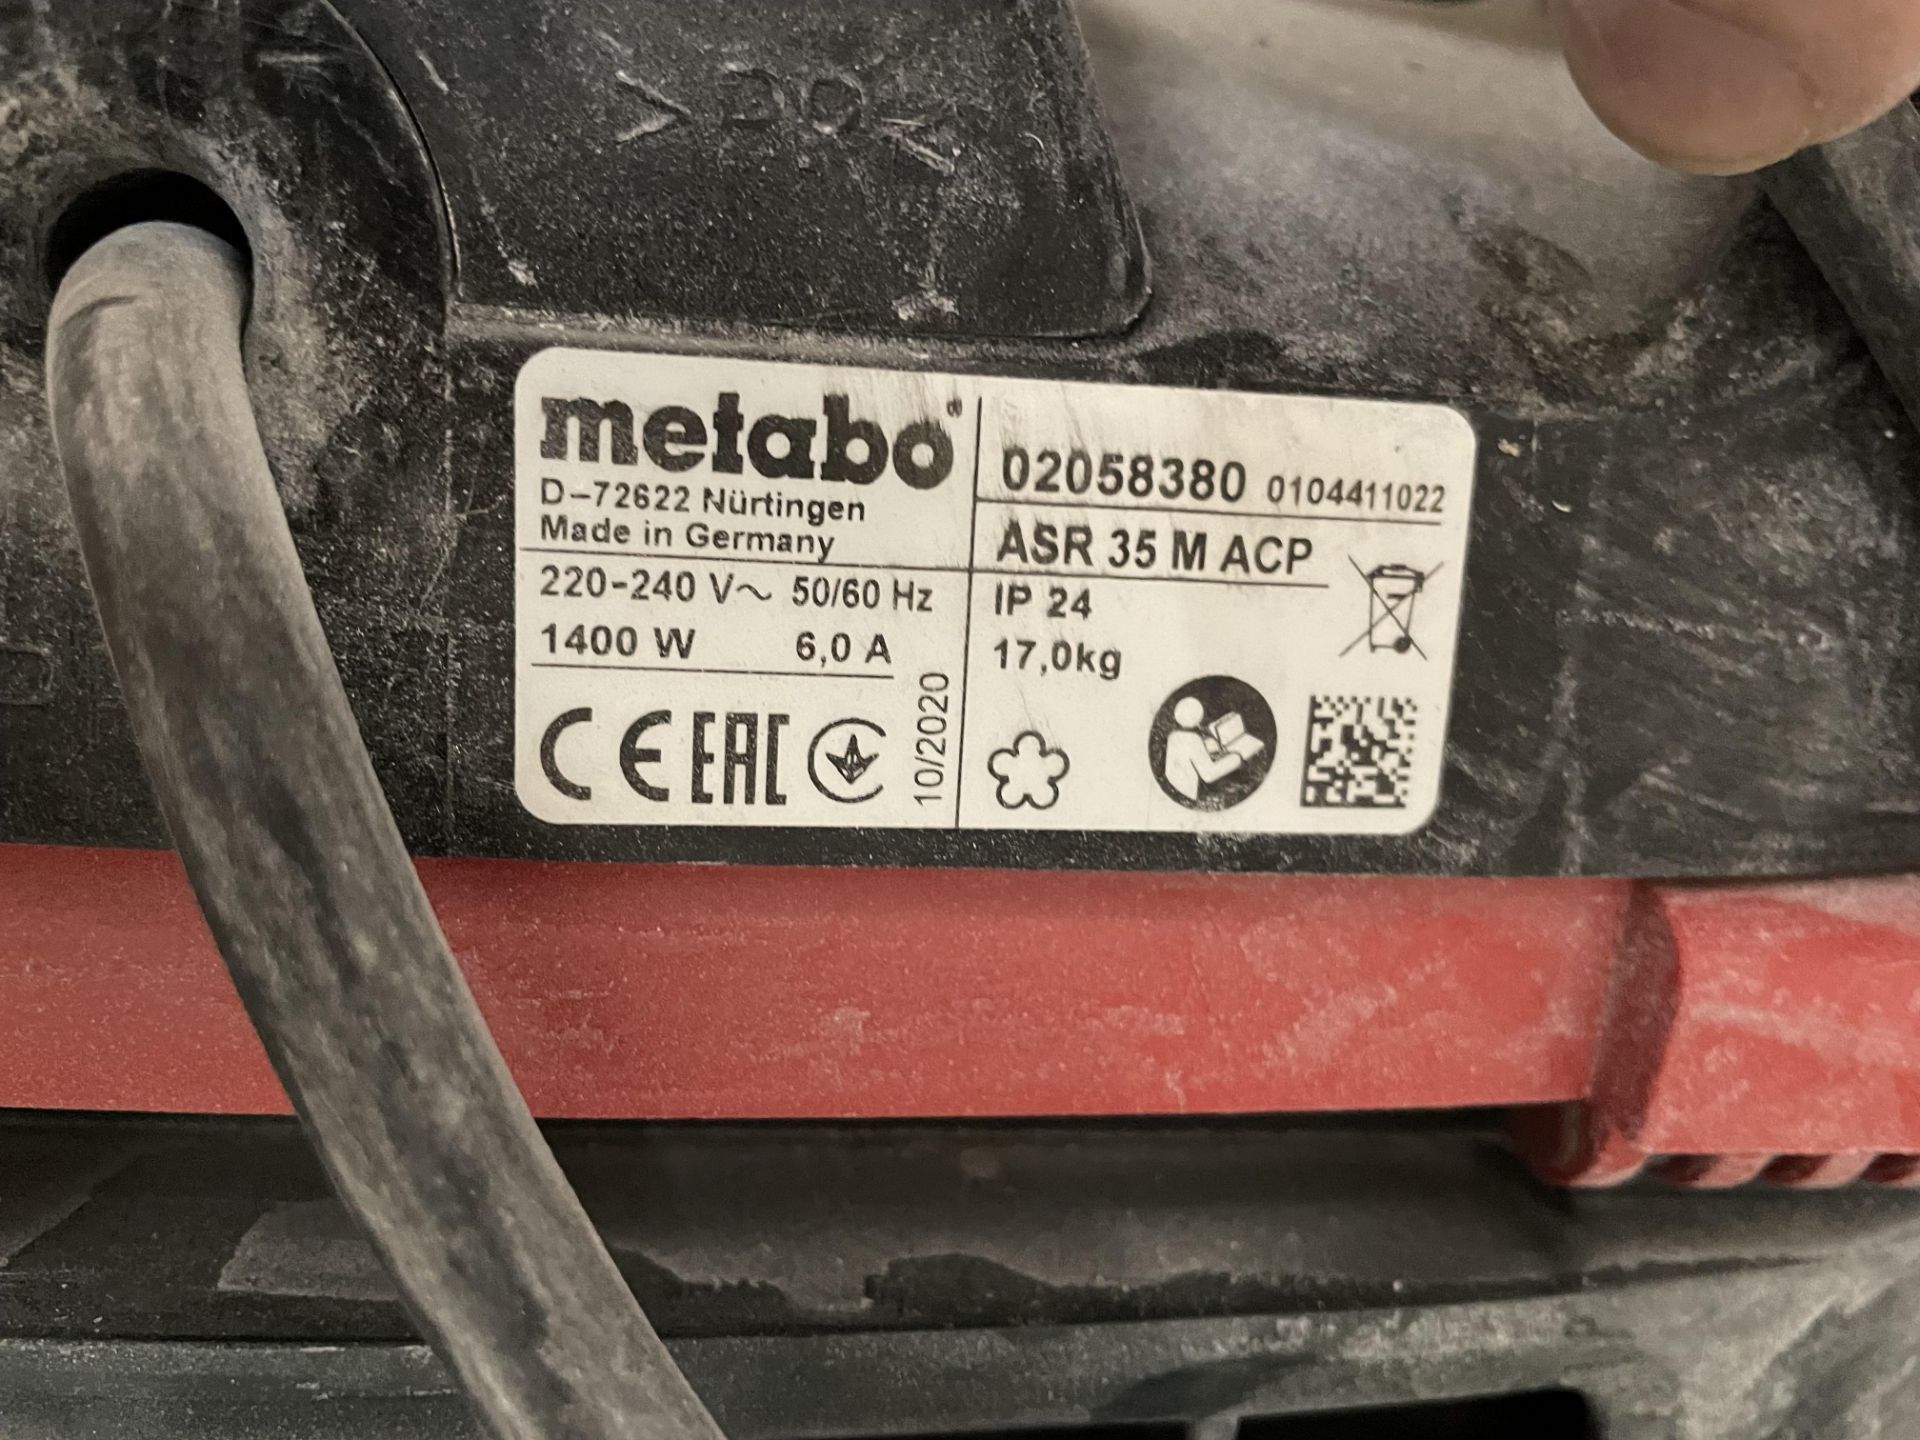 Metabo ASR 35M ACP Vacuum Cleaner S/No. 02058380, 240v - Image 2 of 3